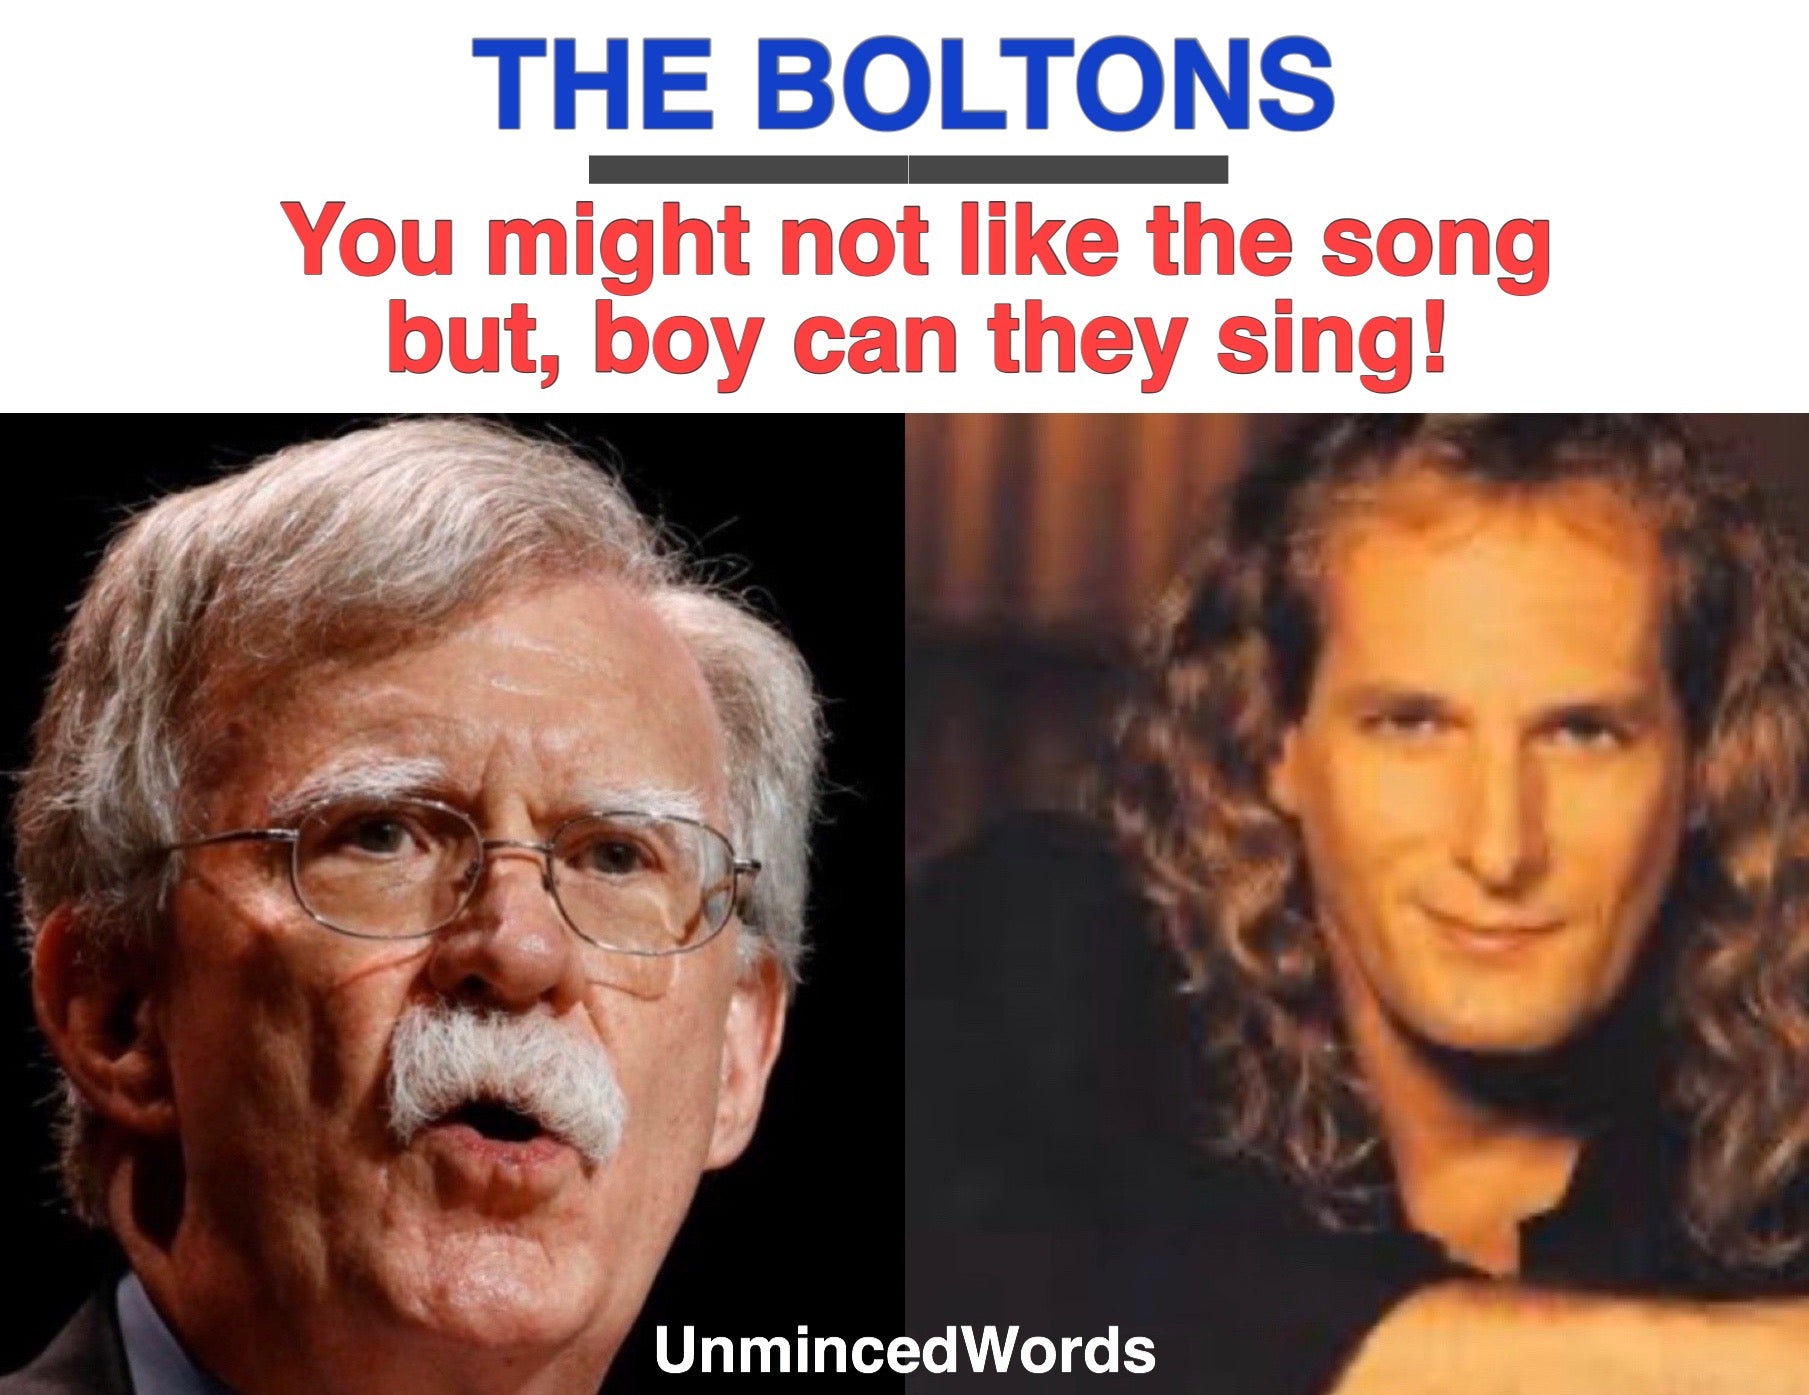 The Boltons- You might not like the song, but boy can they sing!